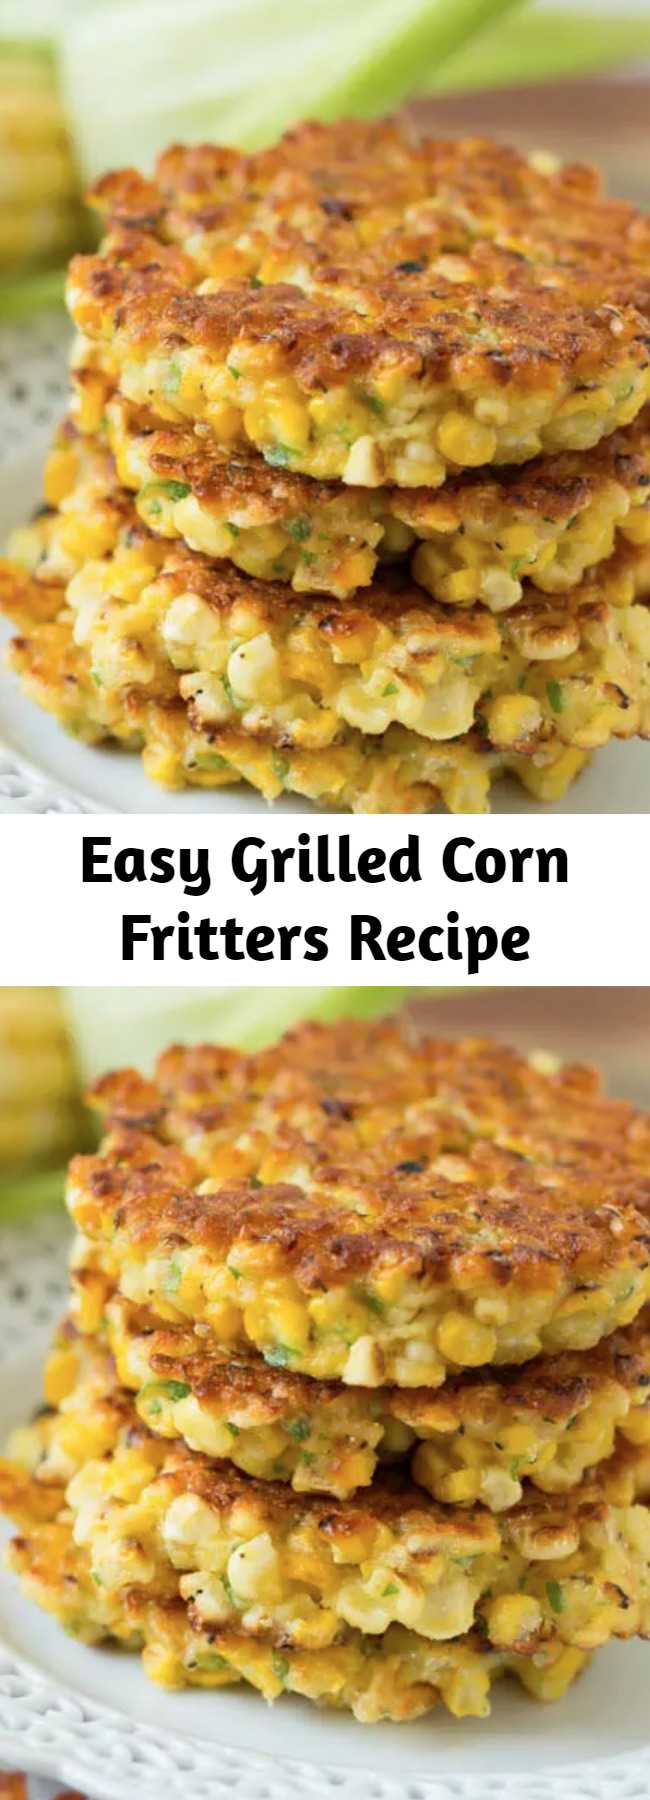 Easy Grilled Corn Fritters Recipe - Grilled corn fritters are a great way to use up all that fresh summer corn and a great, new way to eat it too! These little cakes are so easy to put together!